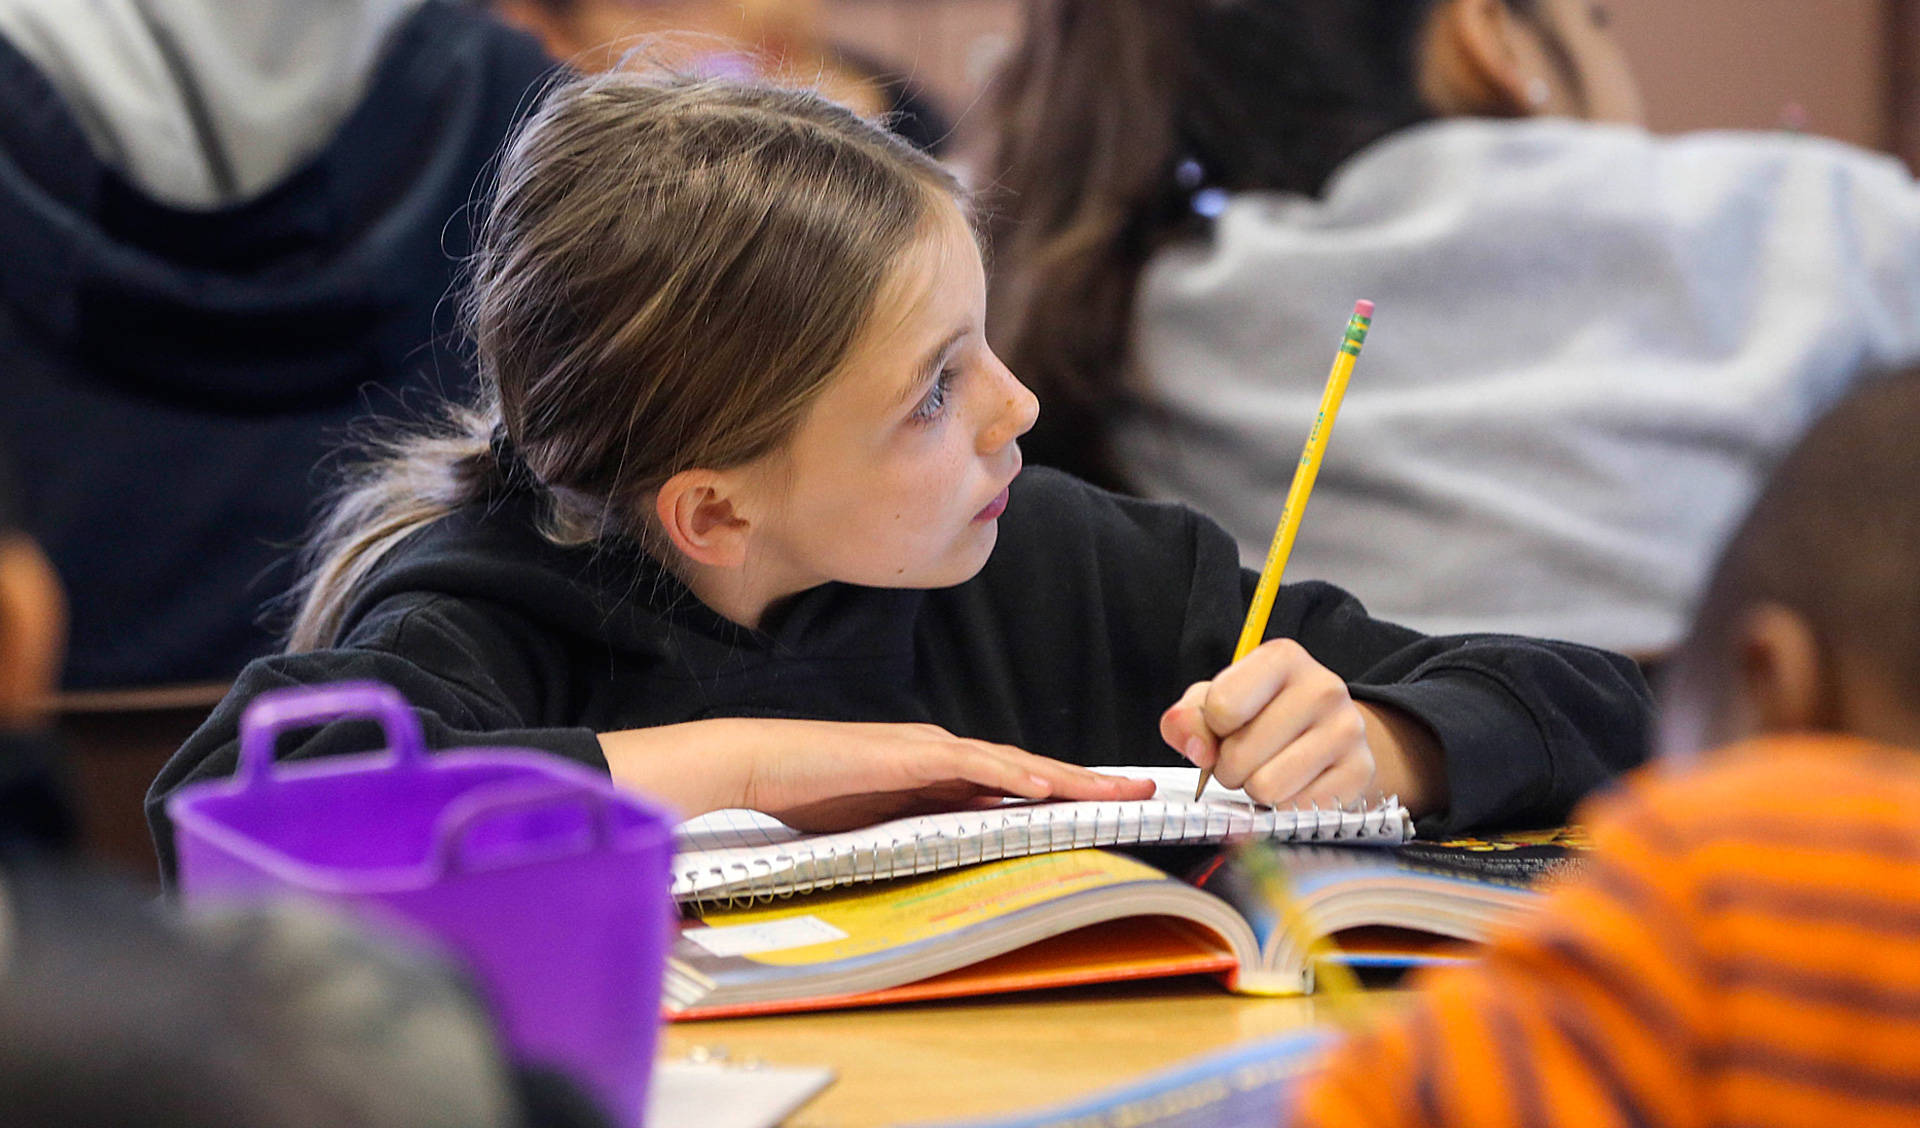 A Greenfield Union student takes notes during class at Kendrick Elementary School in Bakersfield. The district is one of 15 CALmatters studied to understand how well the state’s new school funding formula is working. Henry Barrios/The Californian